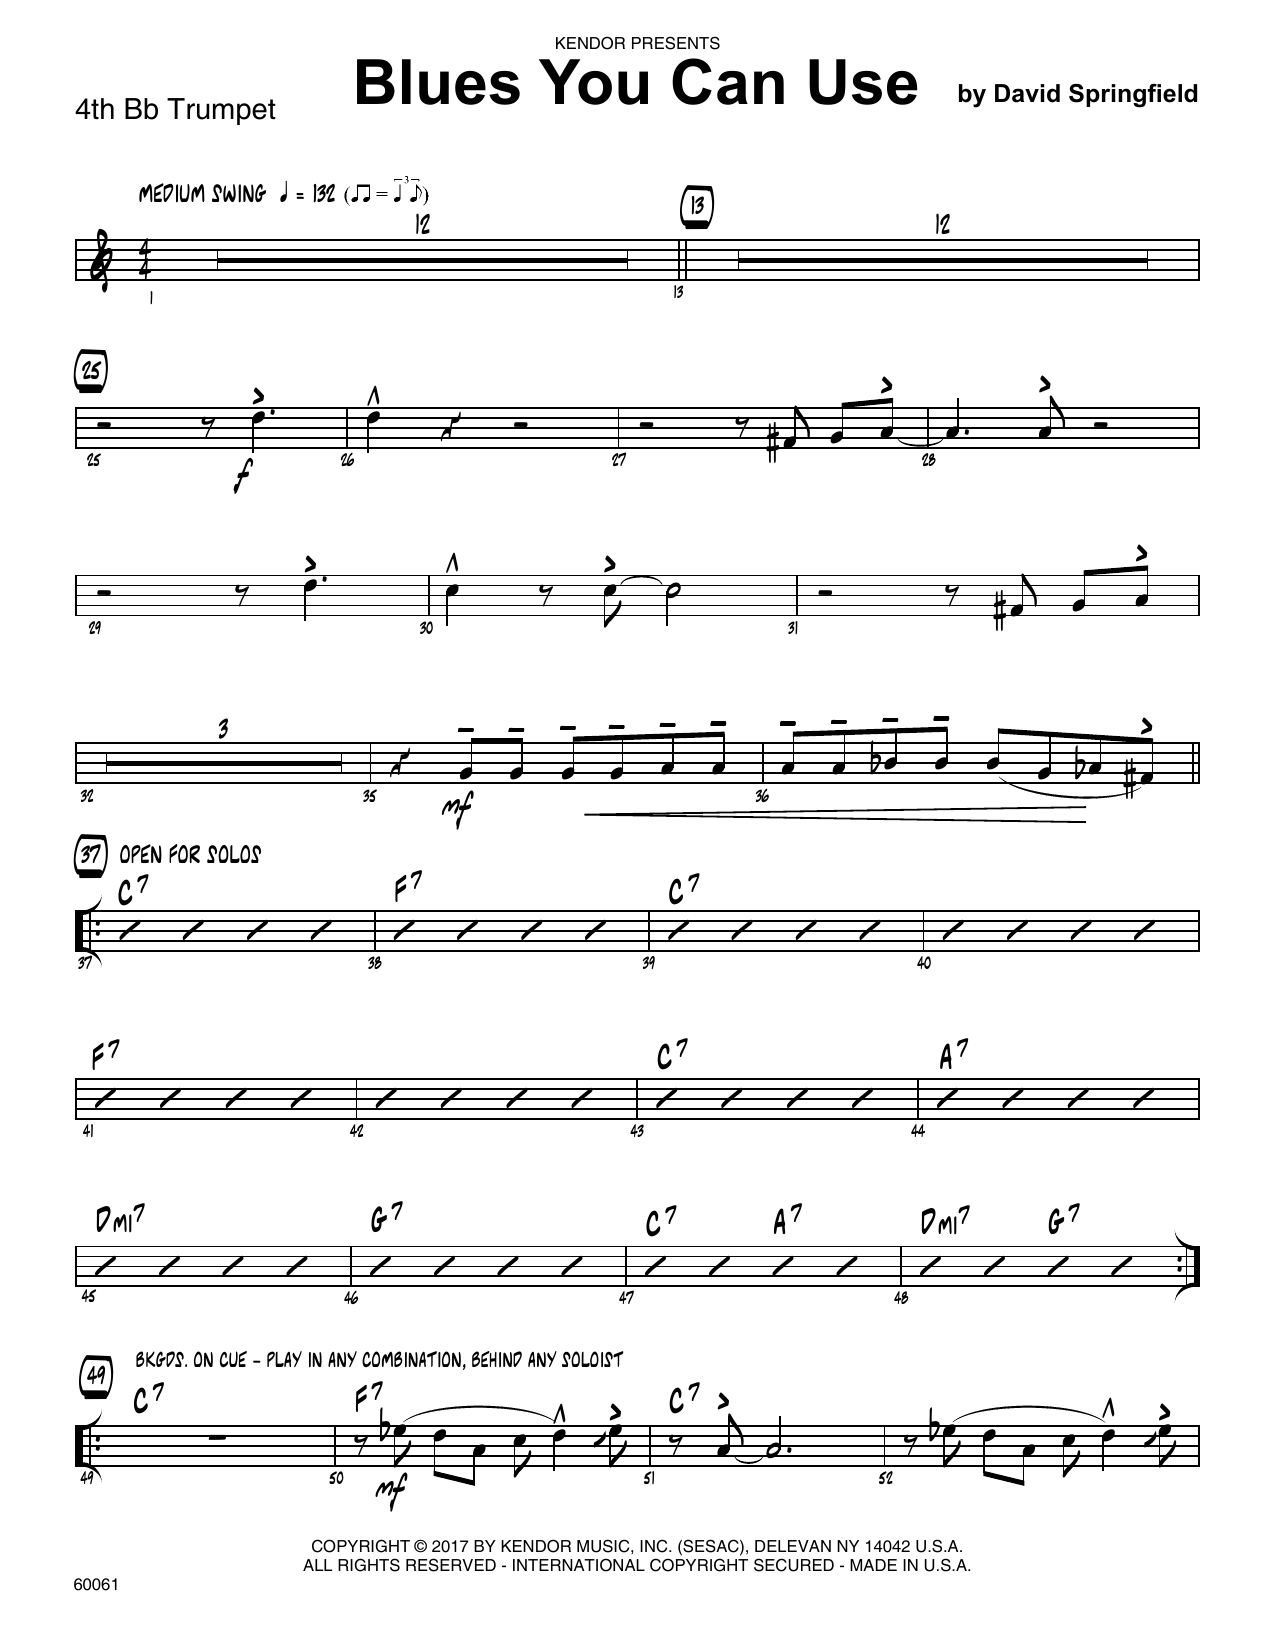 Download David Springfield Blues You Can Use - 4th Bb Trumpet sheet music and printable PDF score & Jazz music notes